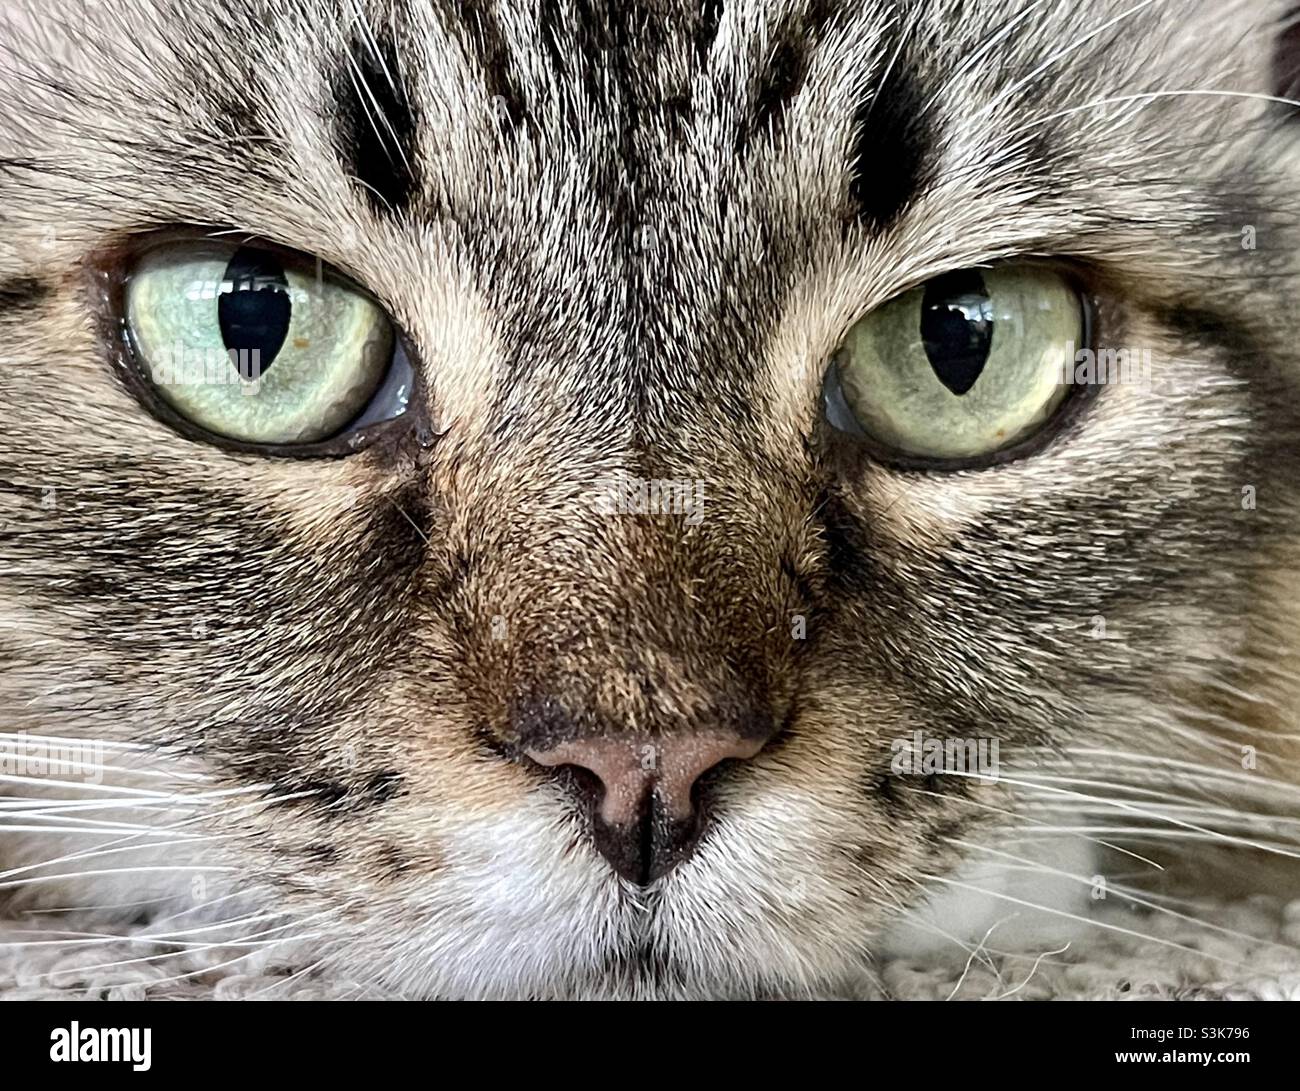 Lose up of a green eyed kitty cat. Stock Photo